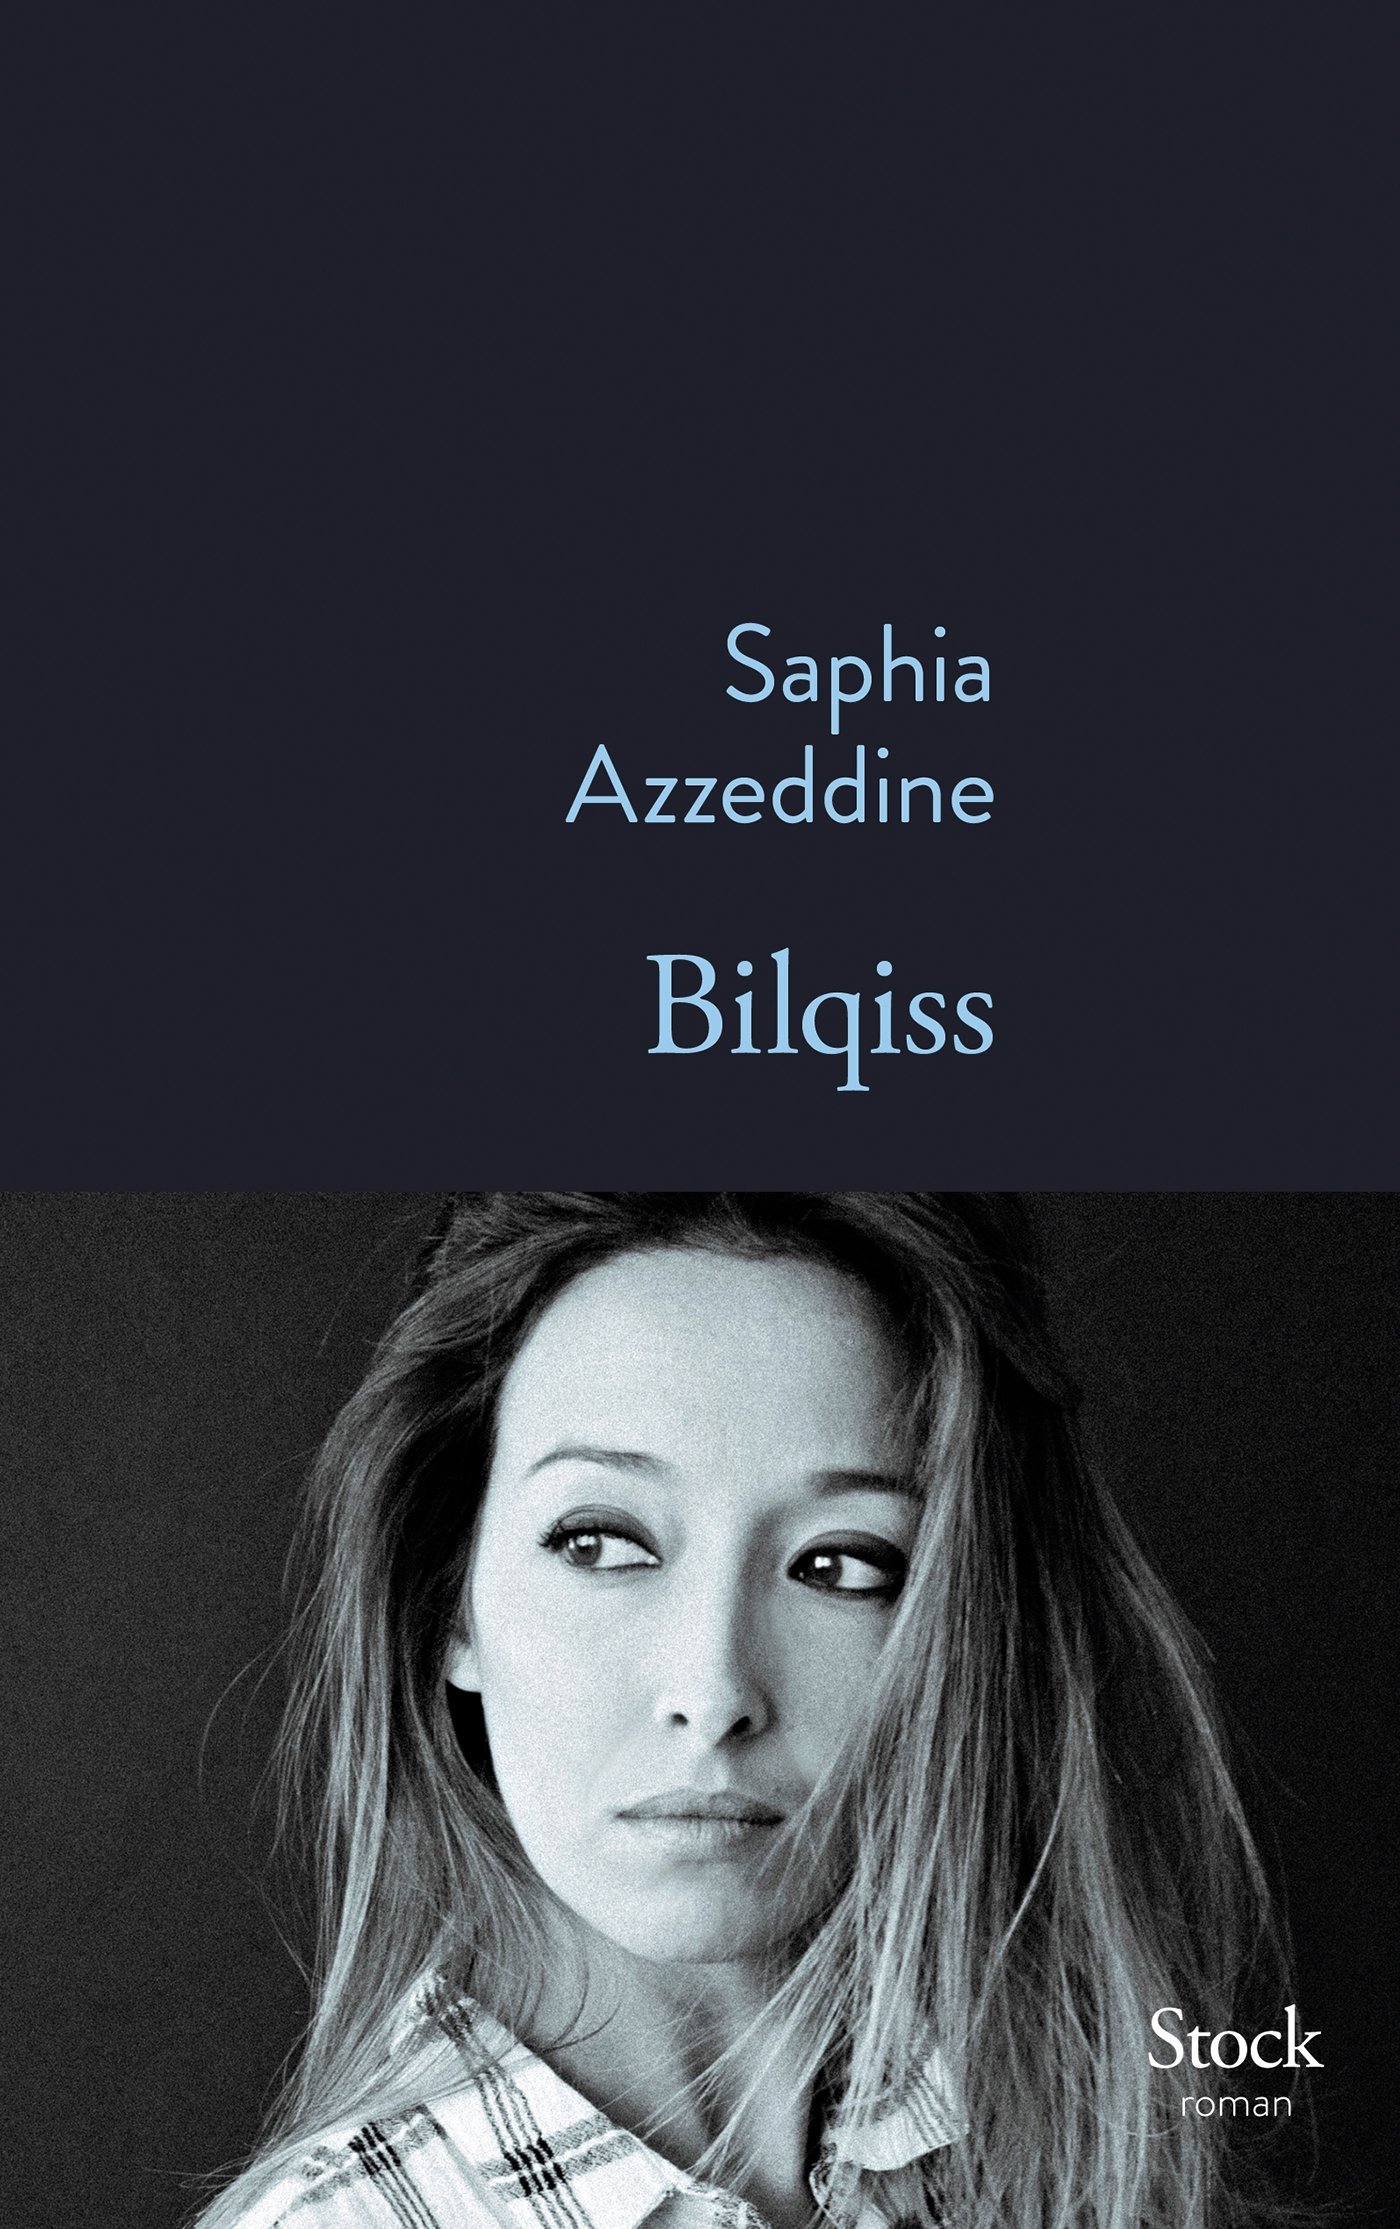 Cover of Saphia Azzeddineʹs "Bilqiss" (published in French by Editions Stock)